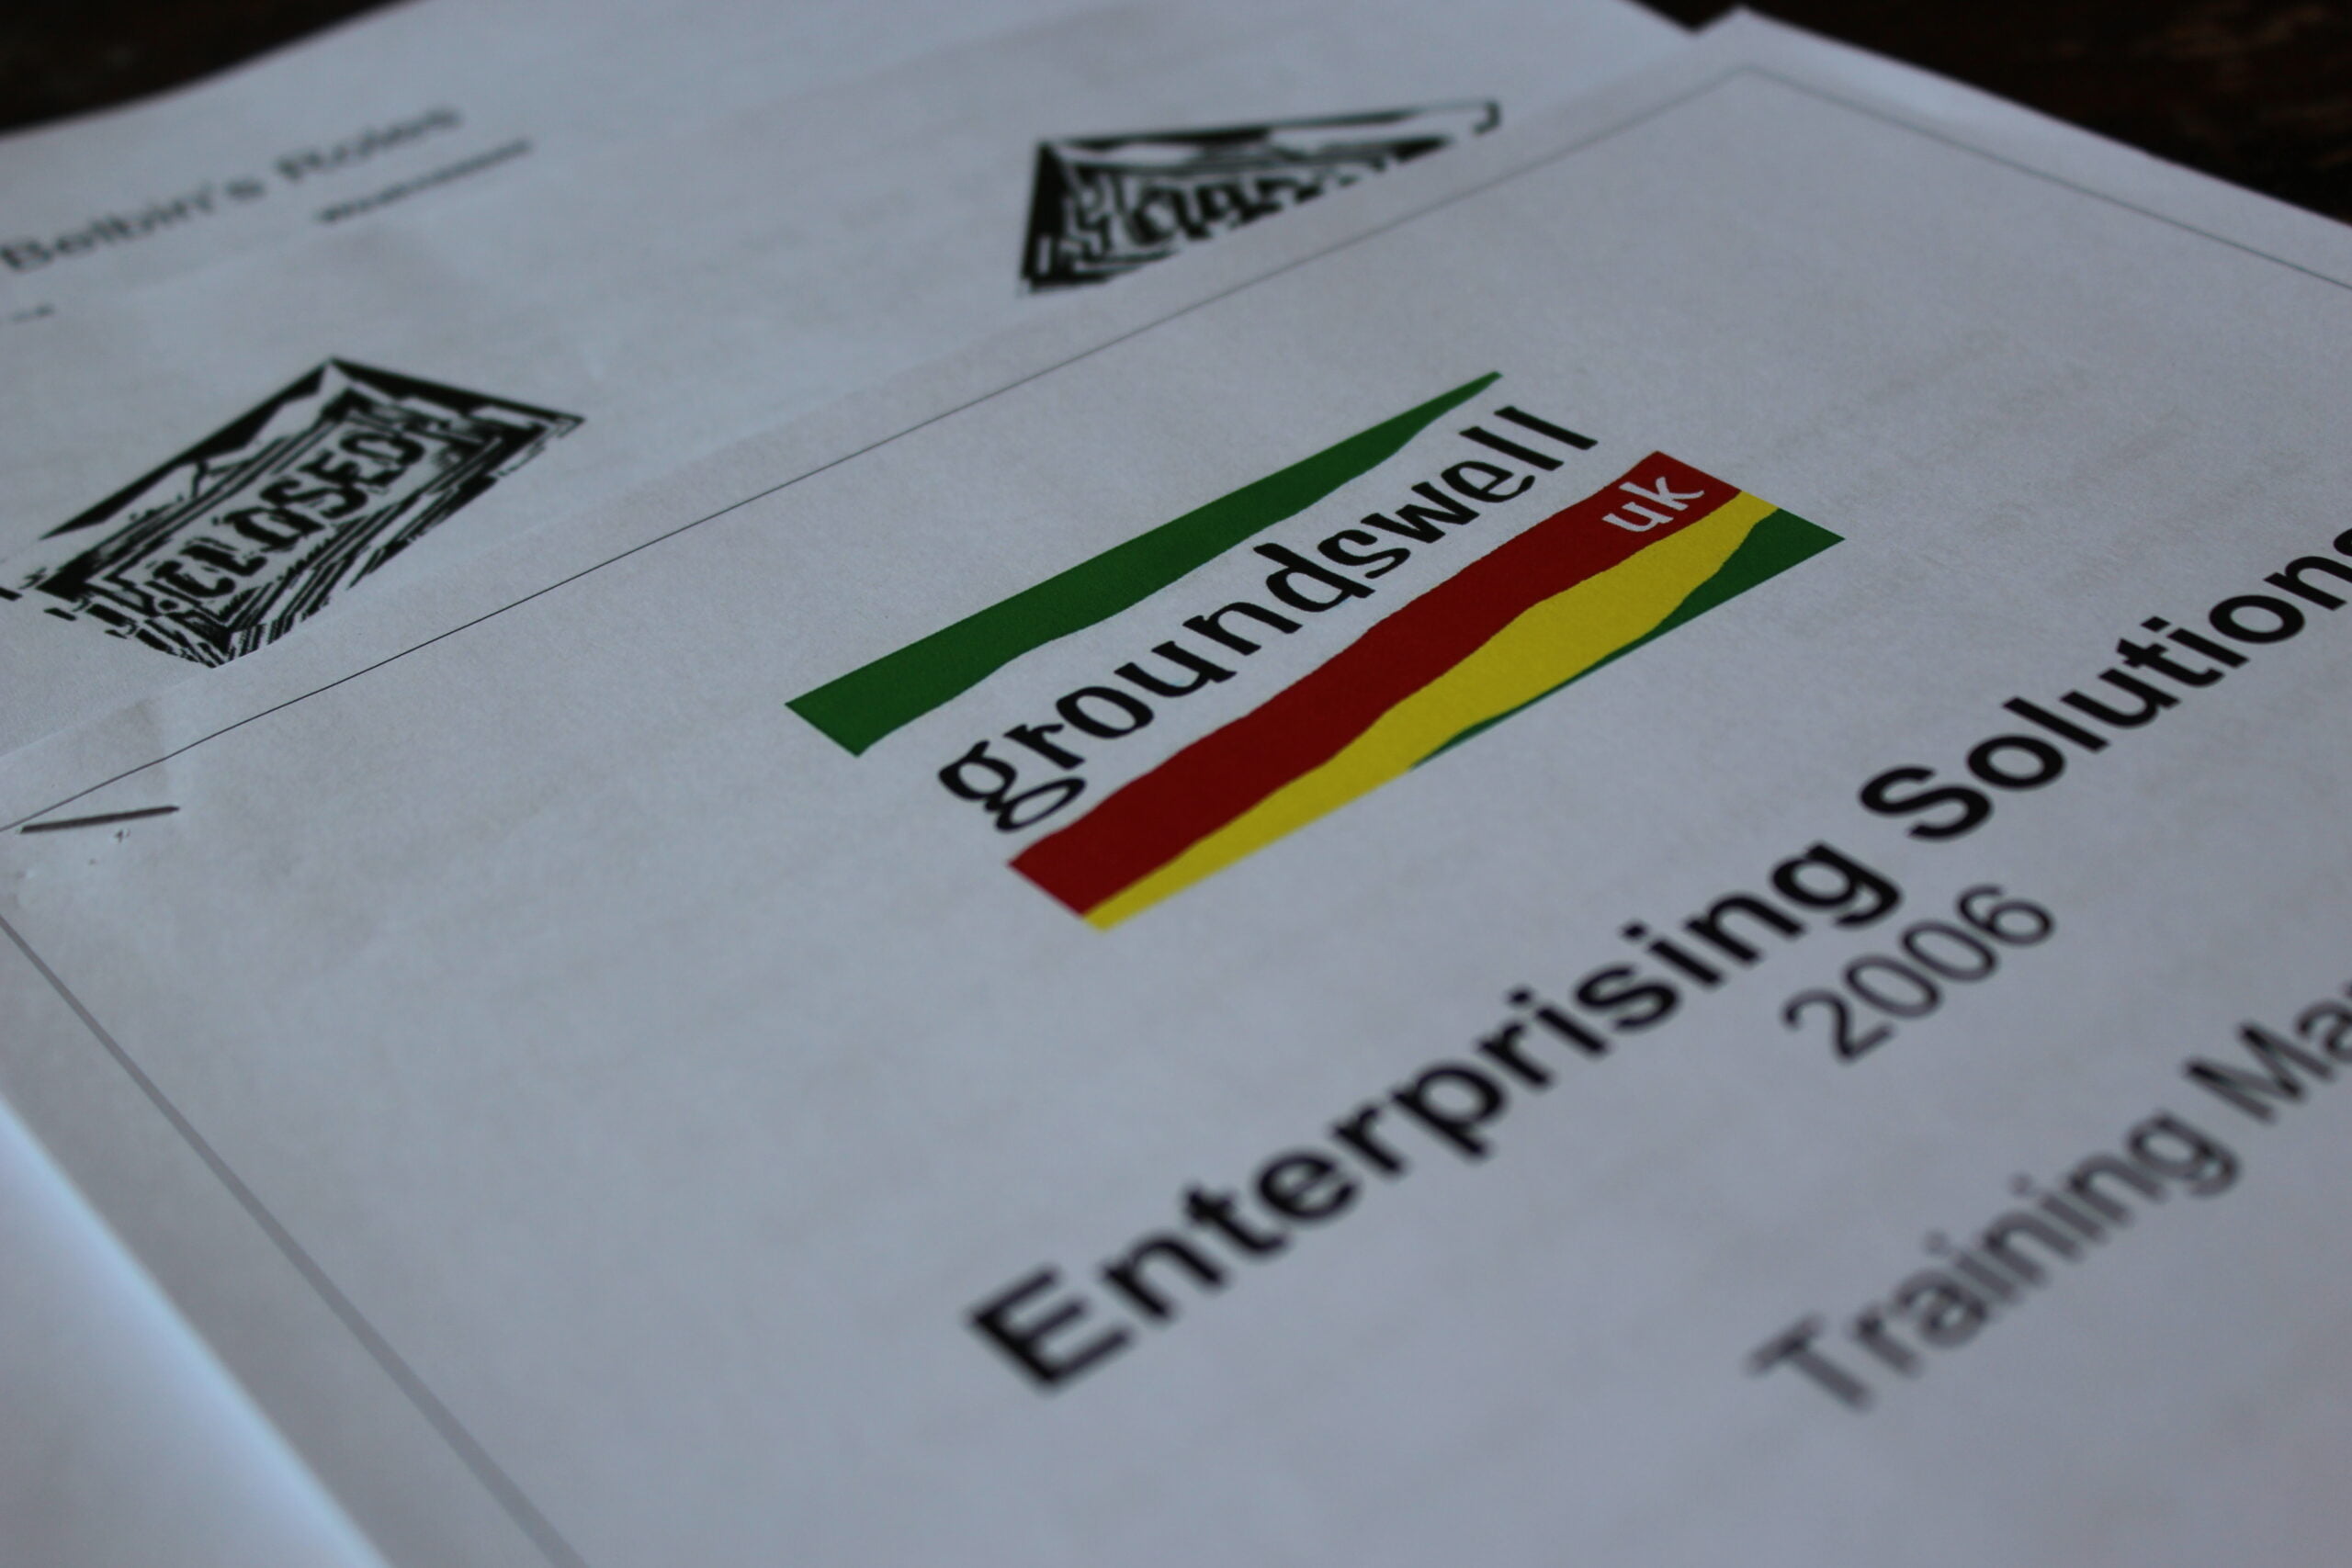 Image of the enterprising solutions training manual